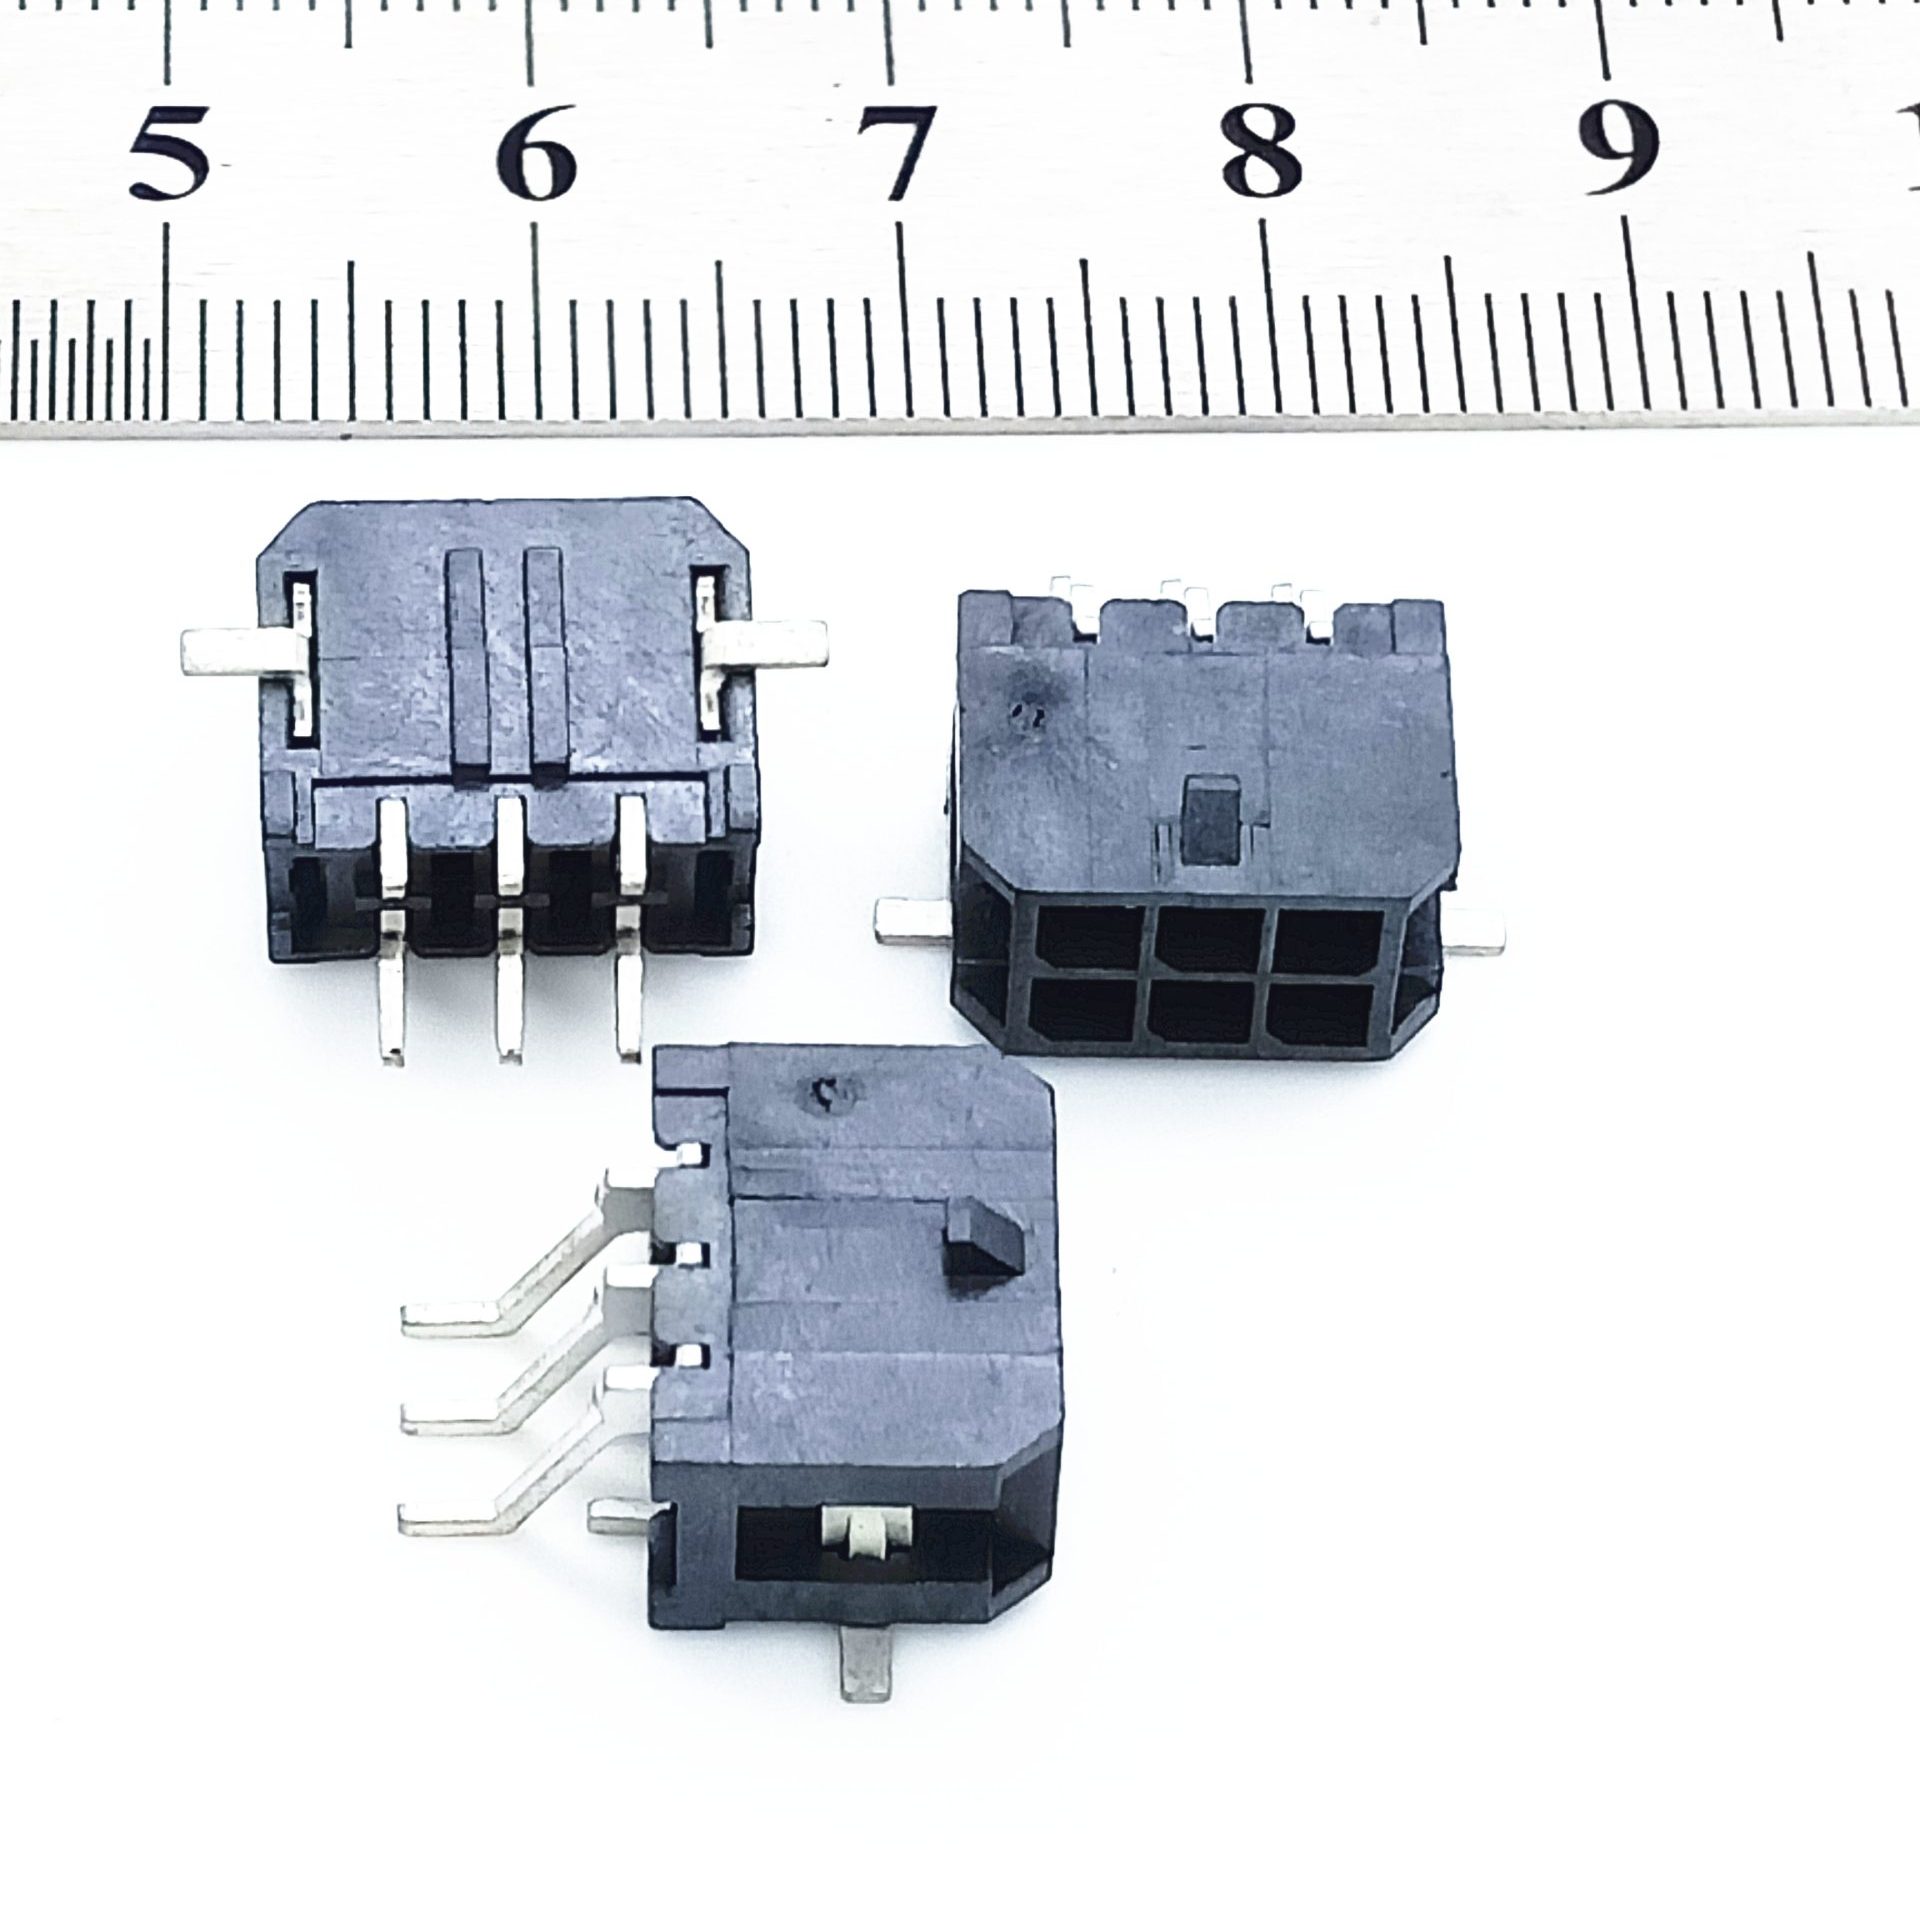 Micro-Fit 3.0 43045 0430450609 430450609 Wire to Board Connector